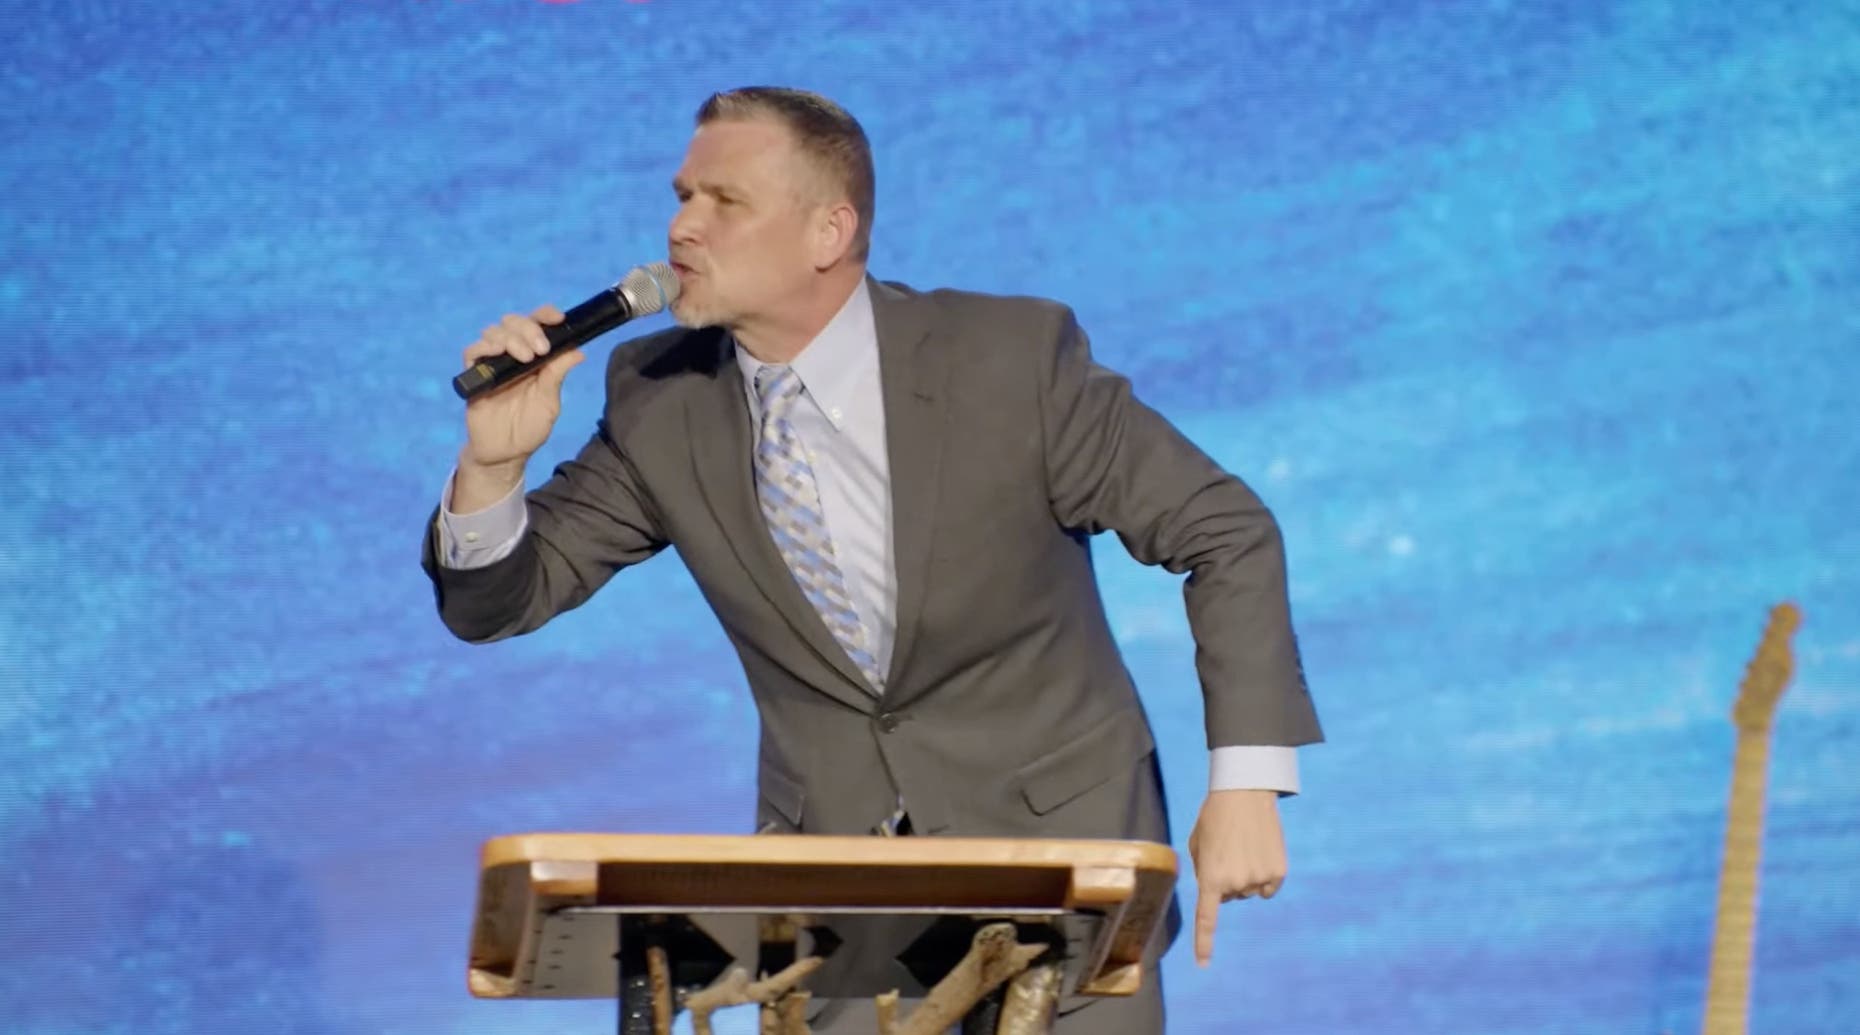 Evangelical pastor Greg Locke DENOUNCES the IRS in selfdefeating snit